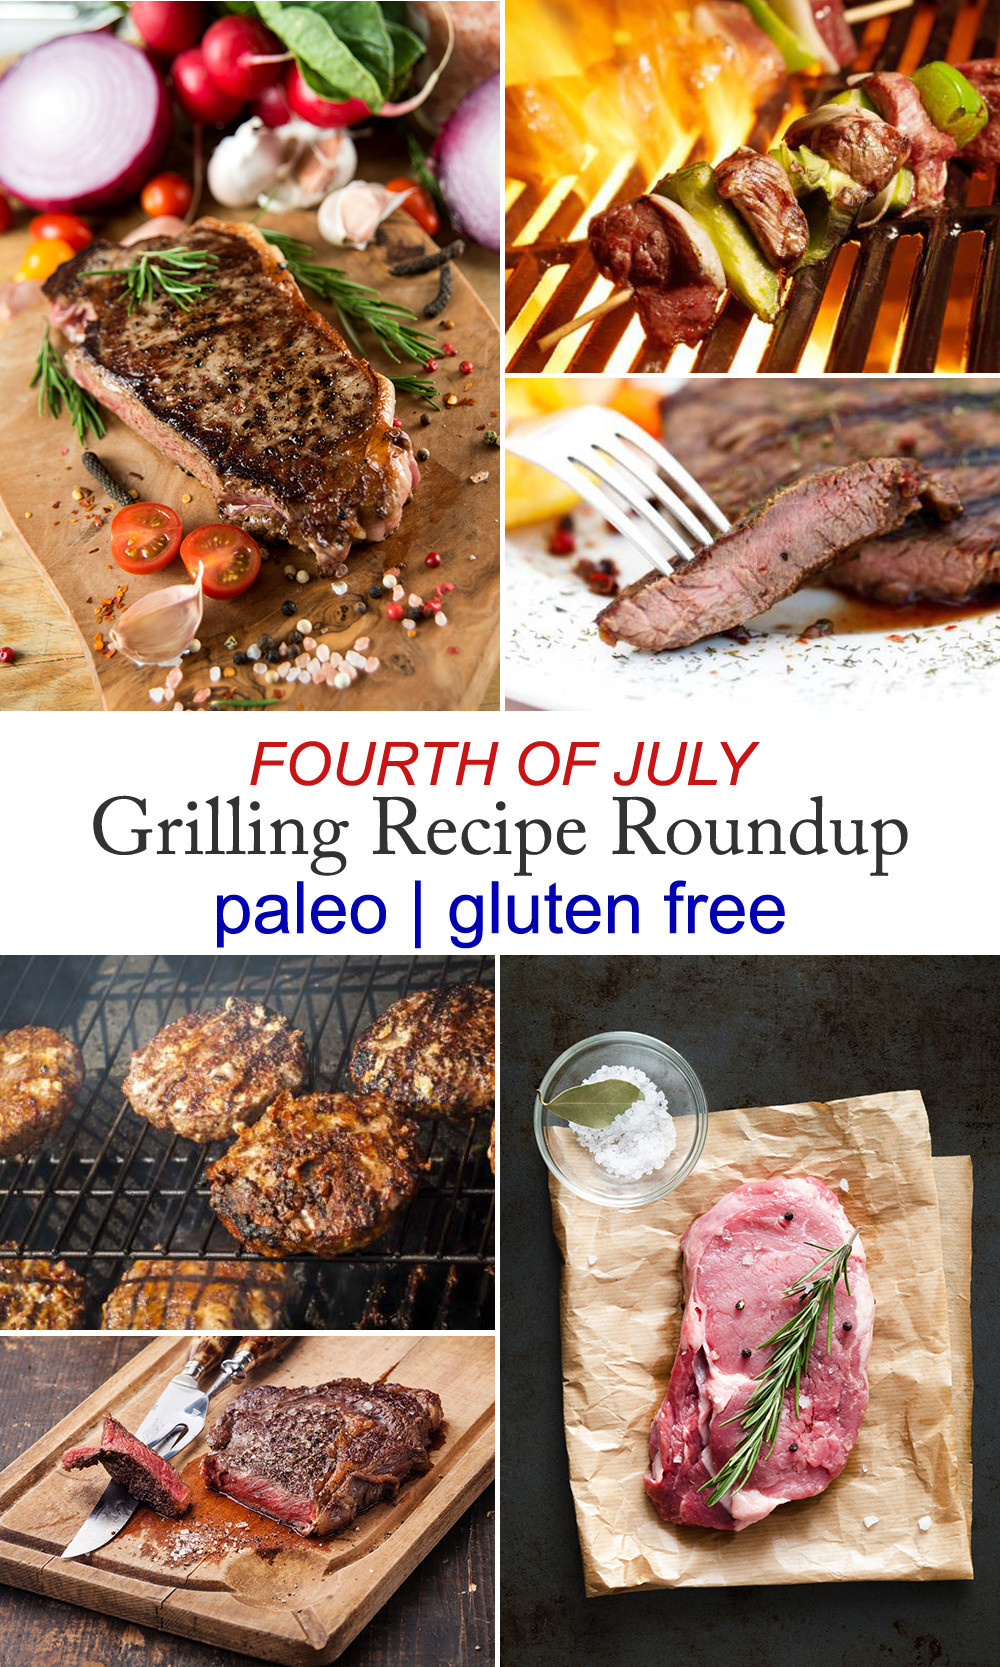 4th Of July Grilling Ideas
 Fourth of July Grilling Recipe Roundup Meathacker